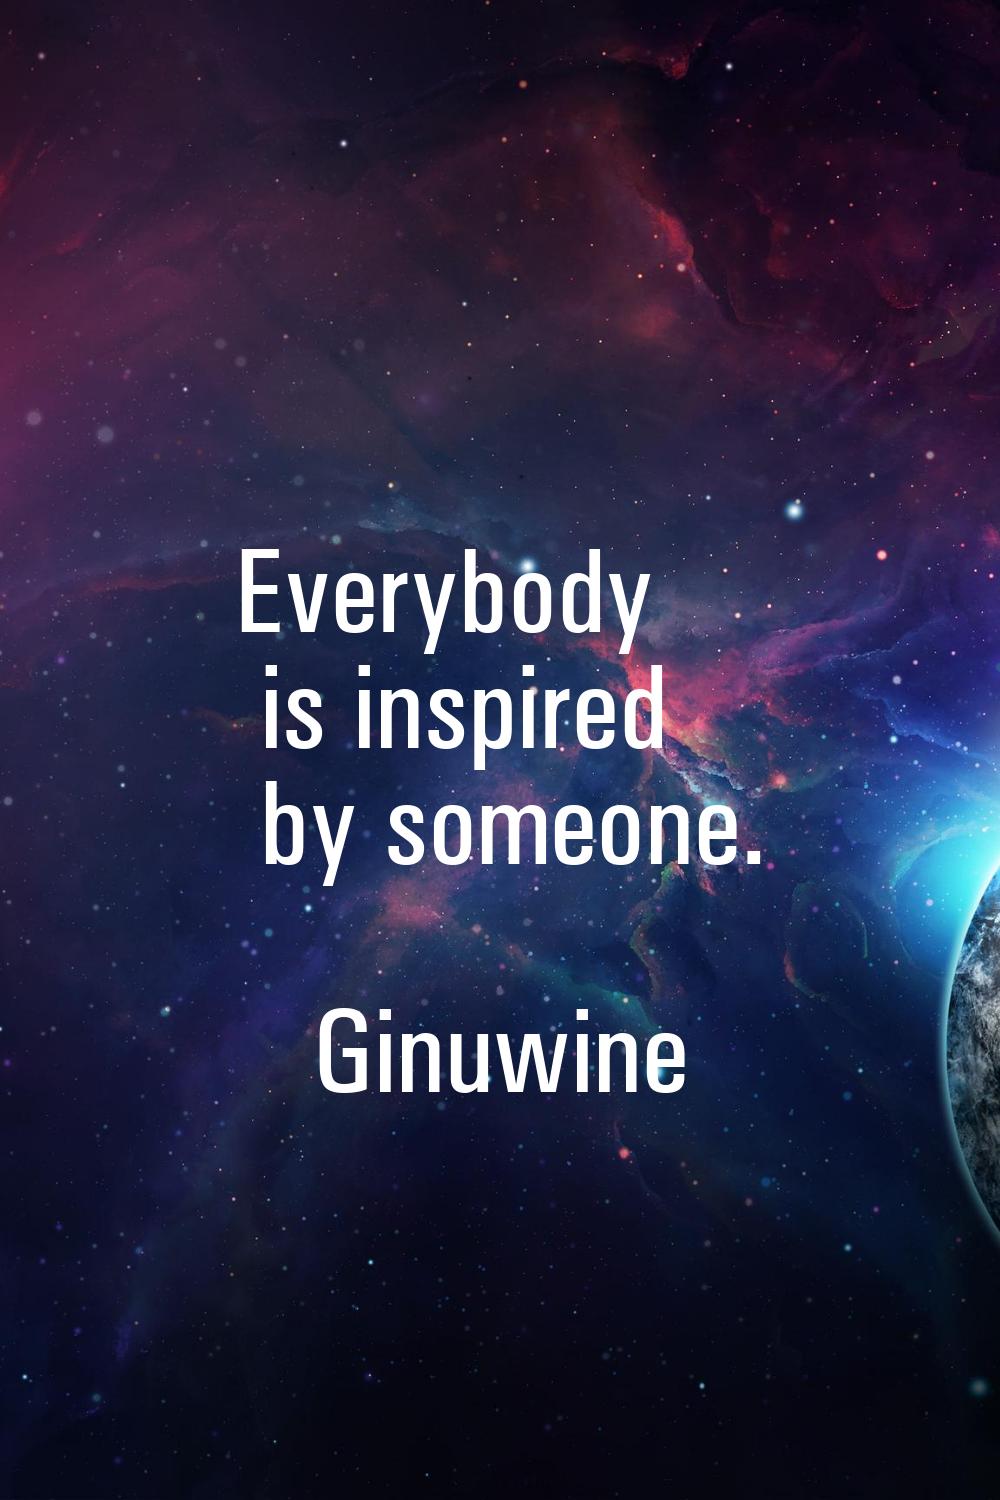 Everybody is inspired by someone.